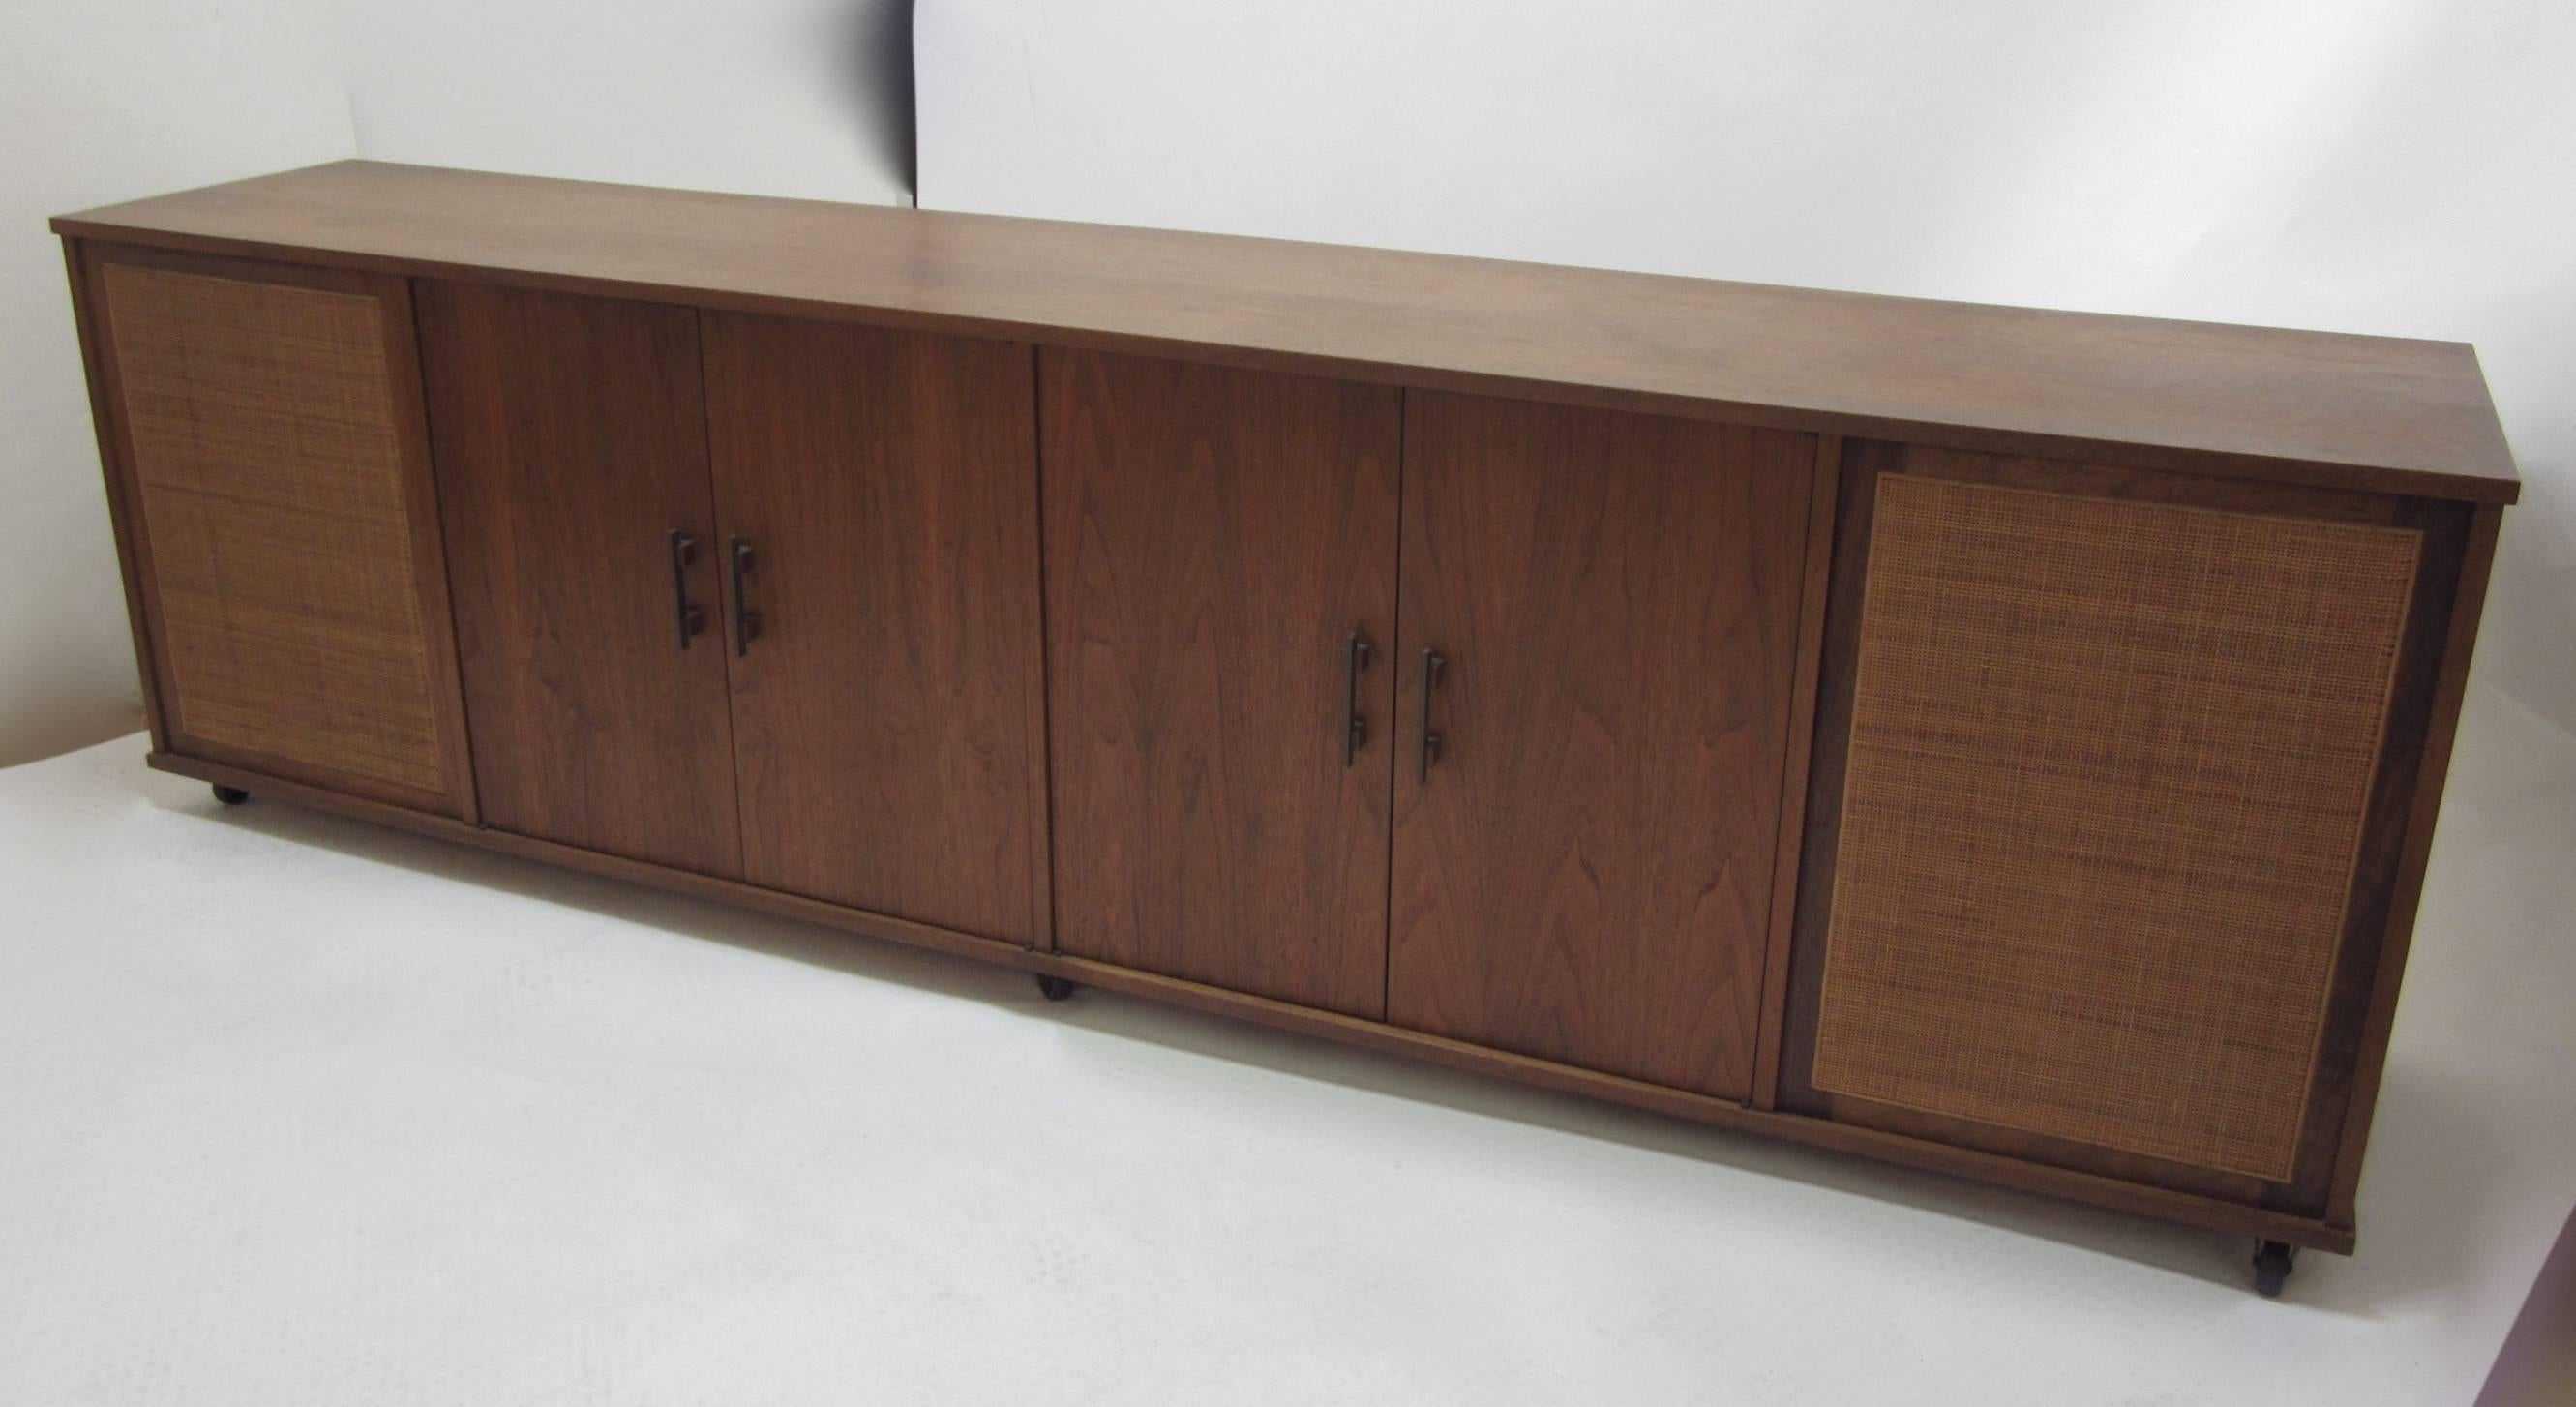 Fantastic eight foot long media cabinet designed to hold records and stereo equipment and speakers behind the caned-front compartments. The interior has been redesigned and the speakers and some shelving have been removed in an amateur fashion but